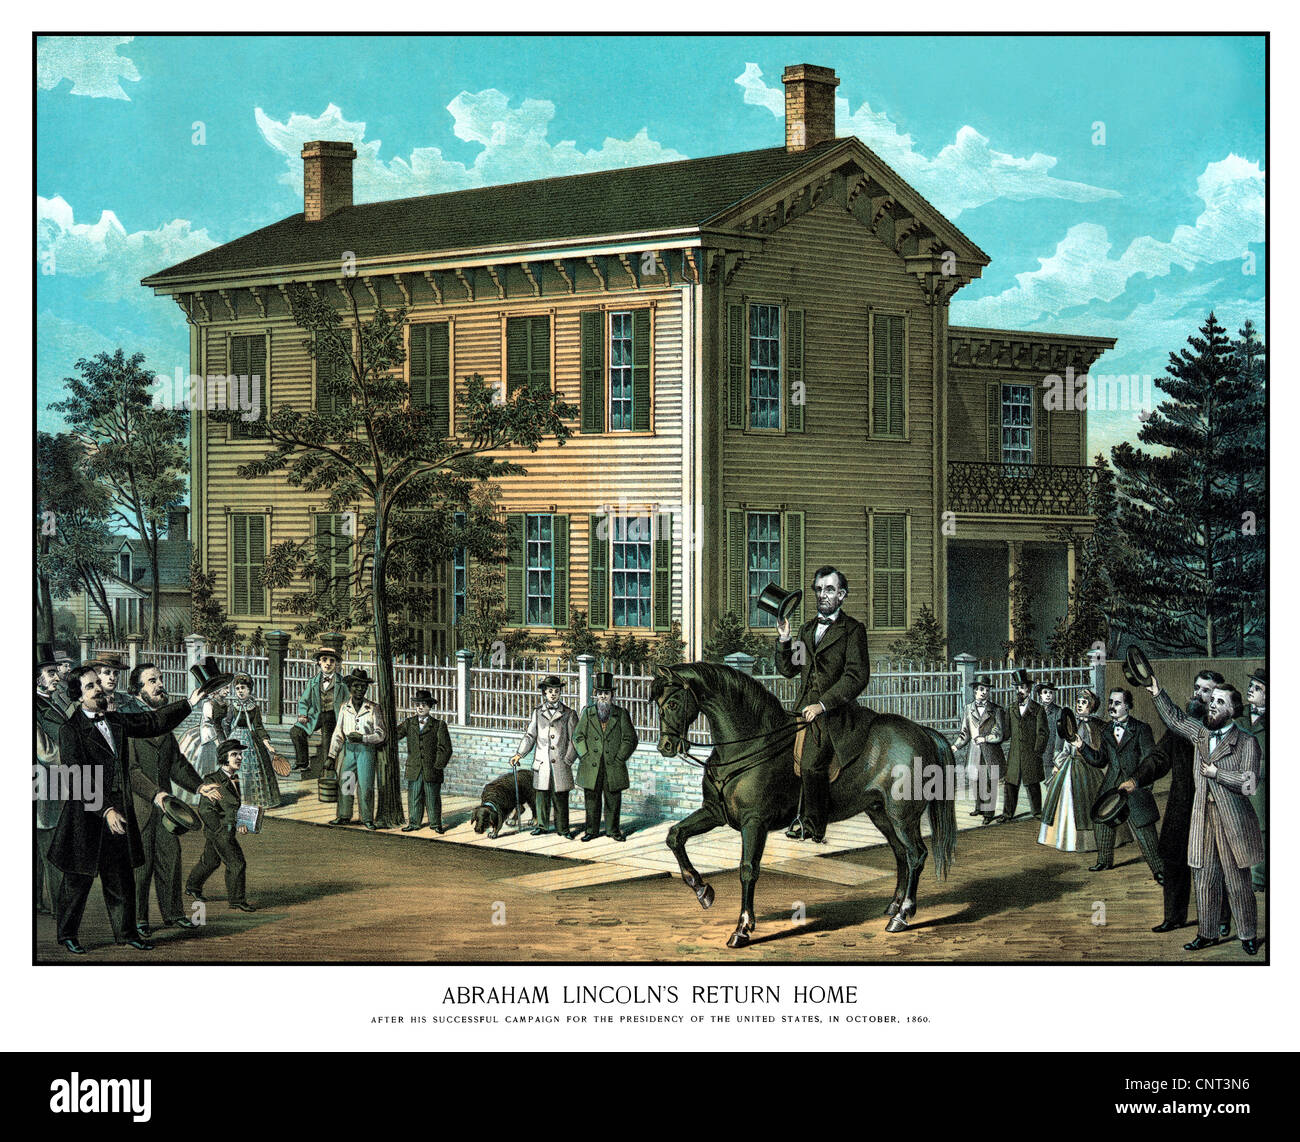 Vintage Civil War print of Abraham Lincoln riding on horseback as a crowd cheers. Stock Photo